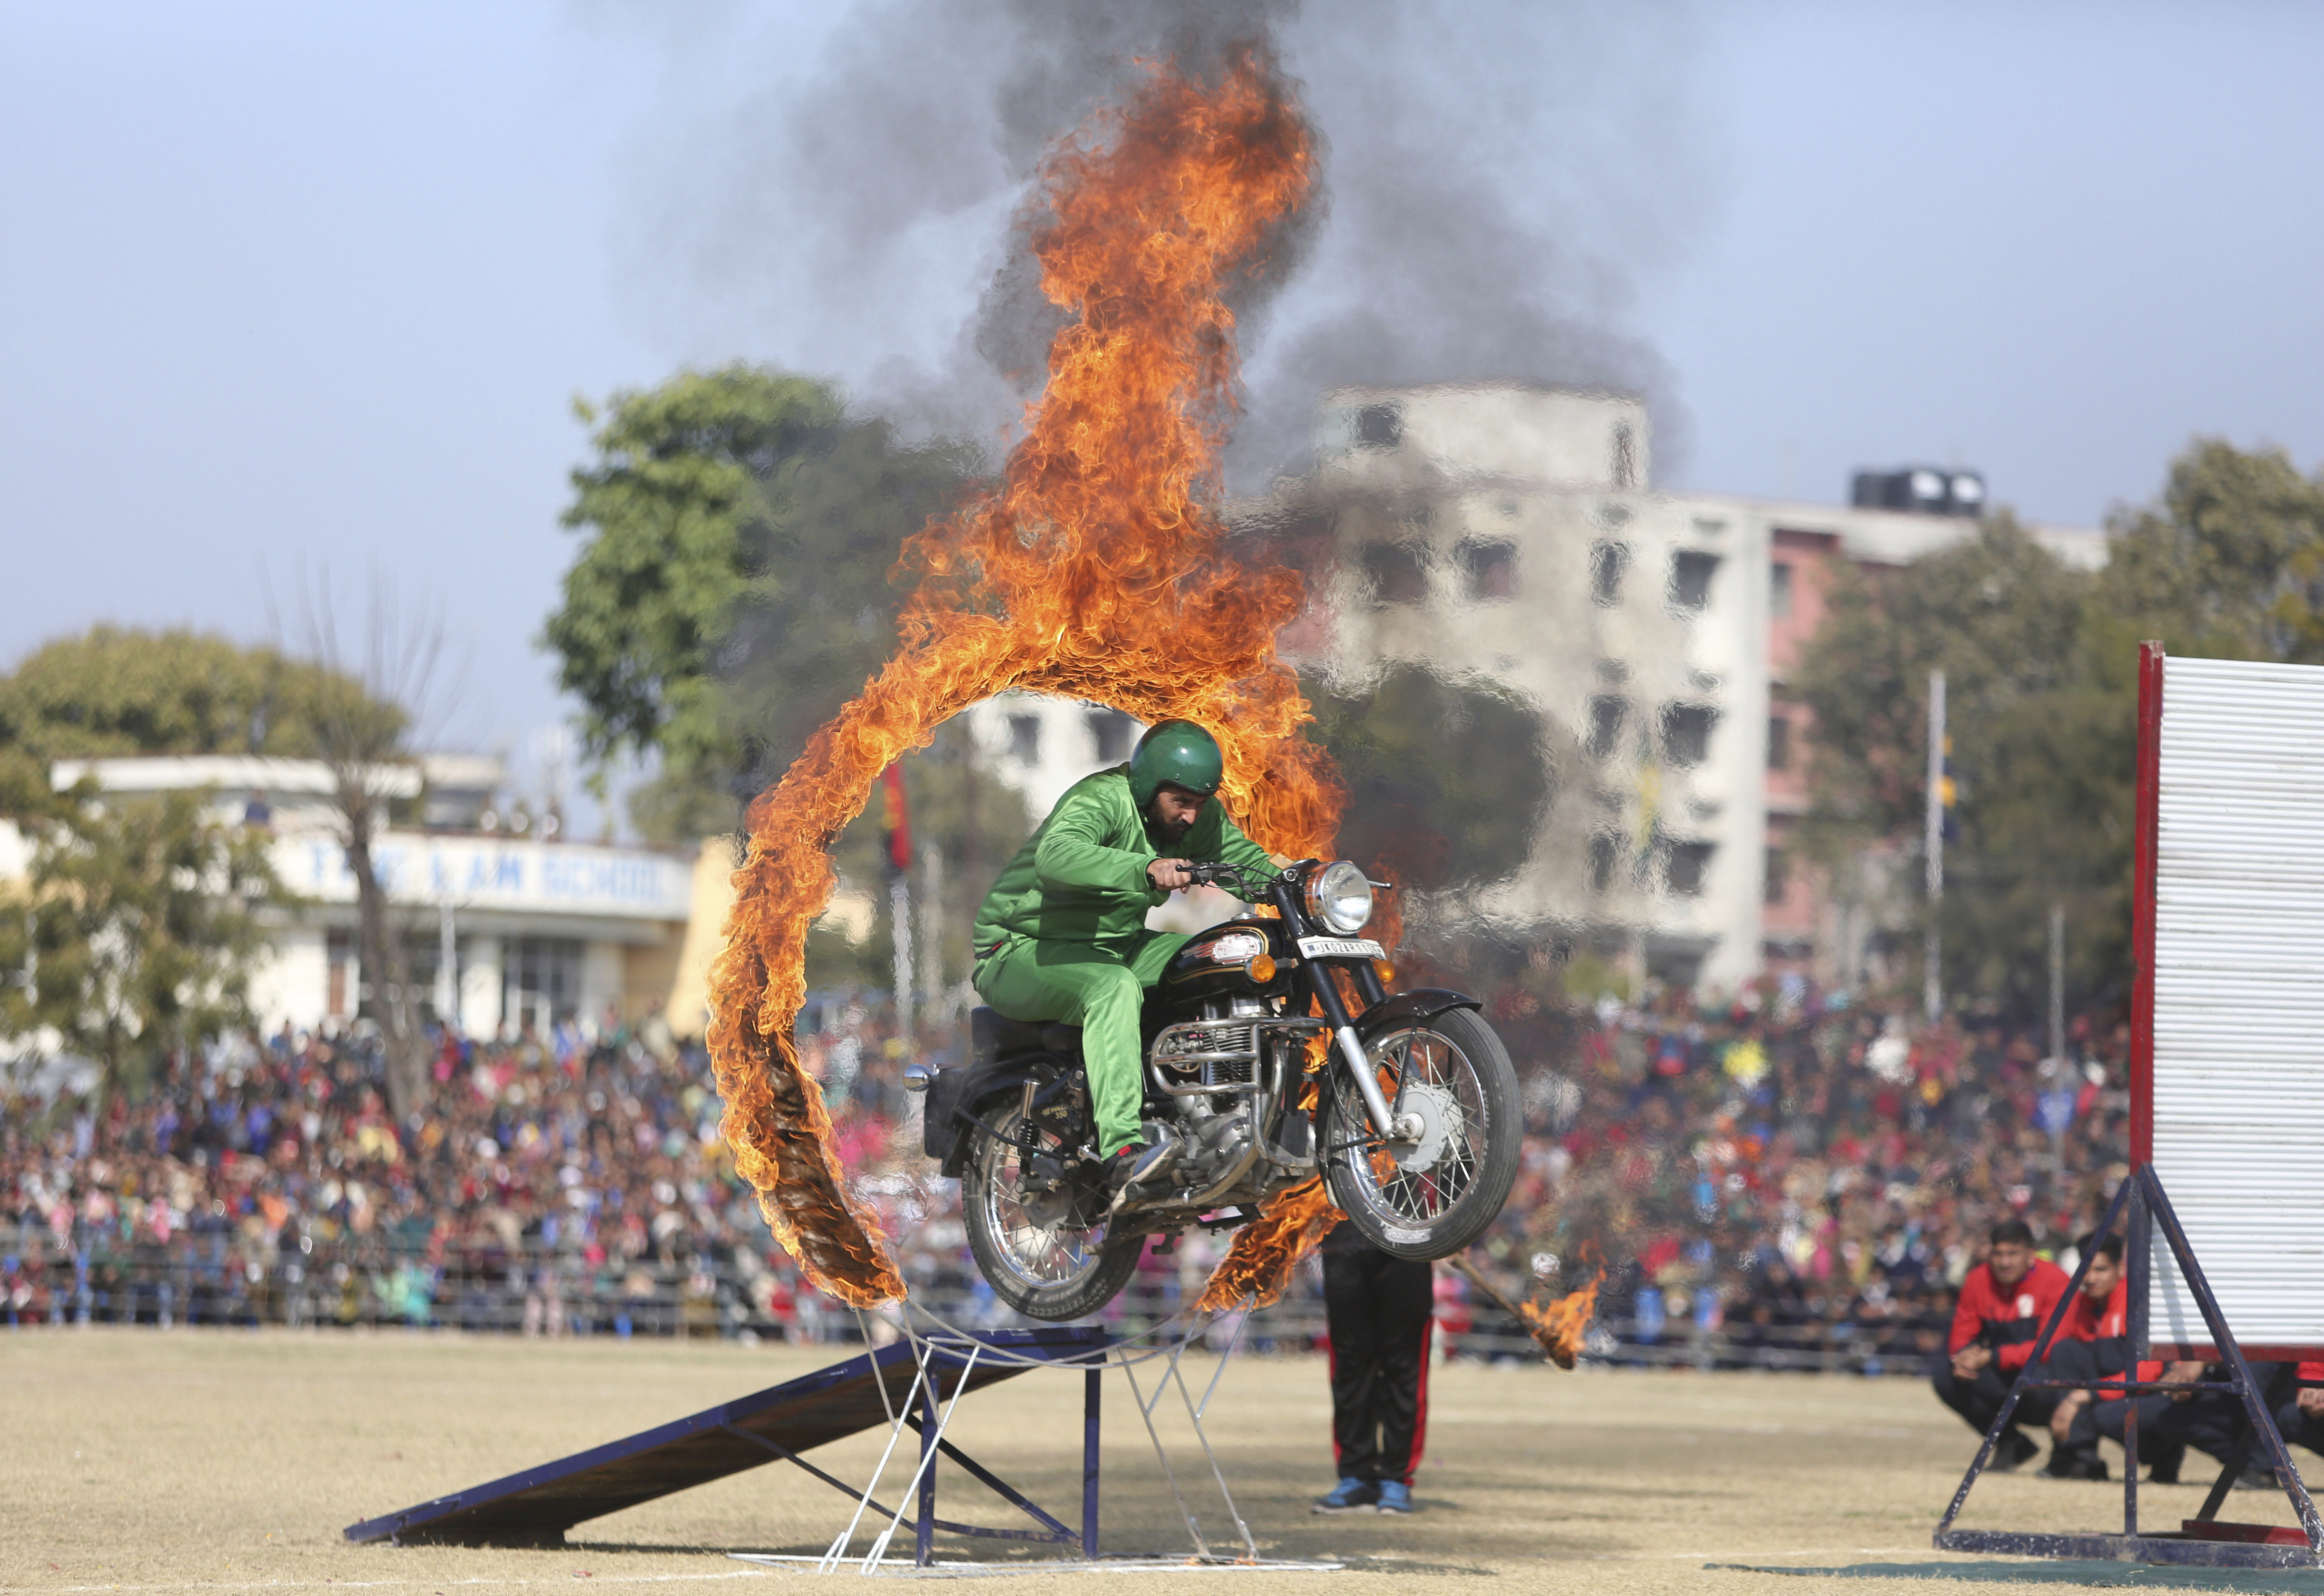 A Jammu and Kashmir state policeman performs a motorcycle stunt during Republic Day celebrations in Jammu, India, Saturday, Jan. 26, 2019. (AP Photo/Channi Anand)